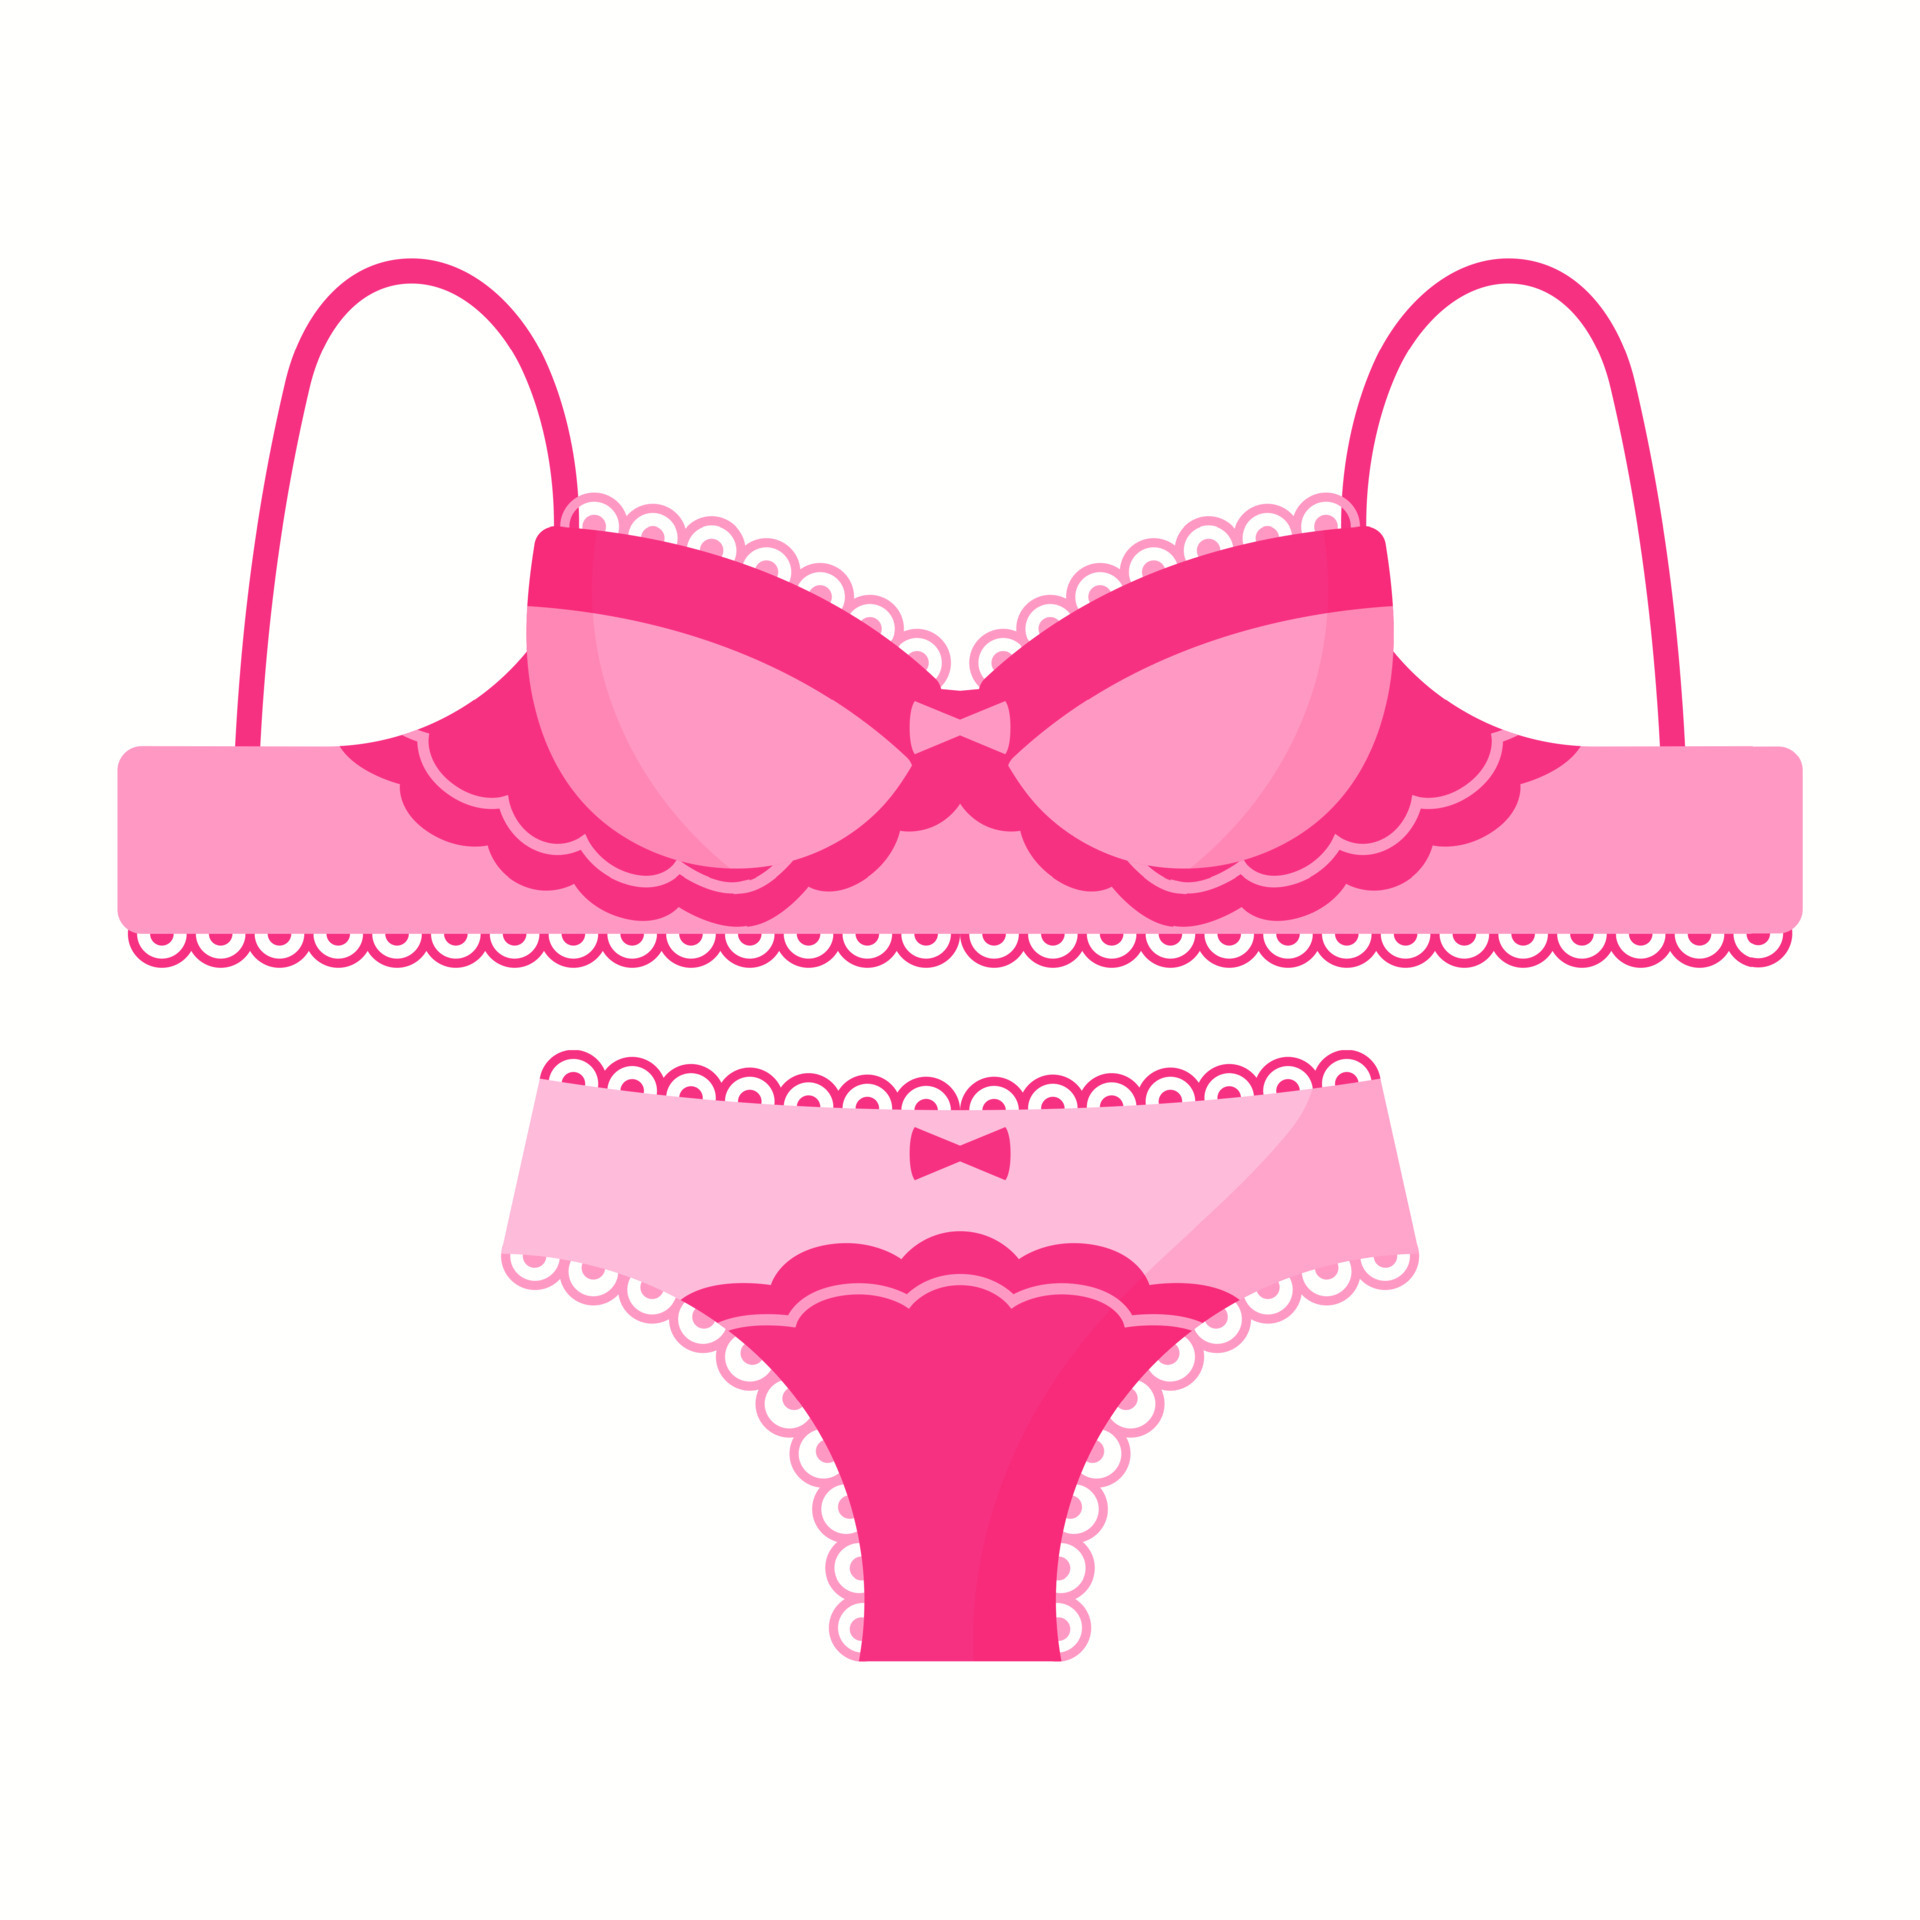 PINK LINGERIE Clipart, SEXY UNDERWEAR Graphic by TereVela Design